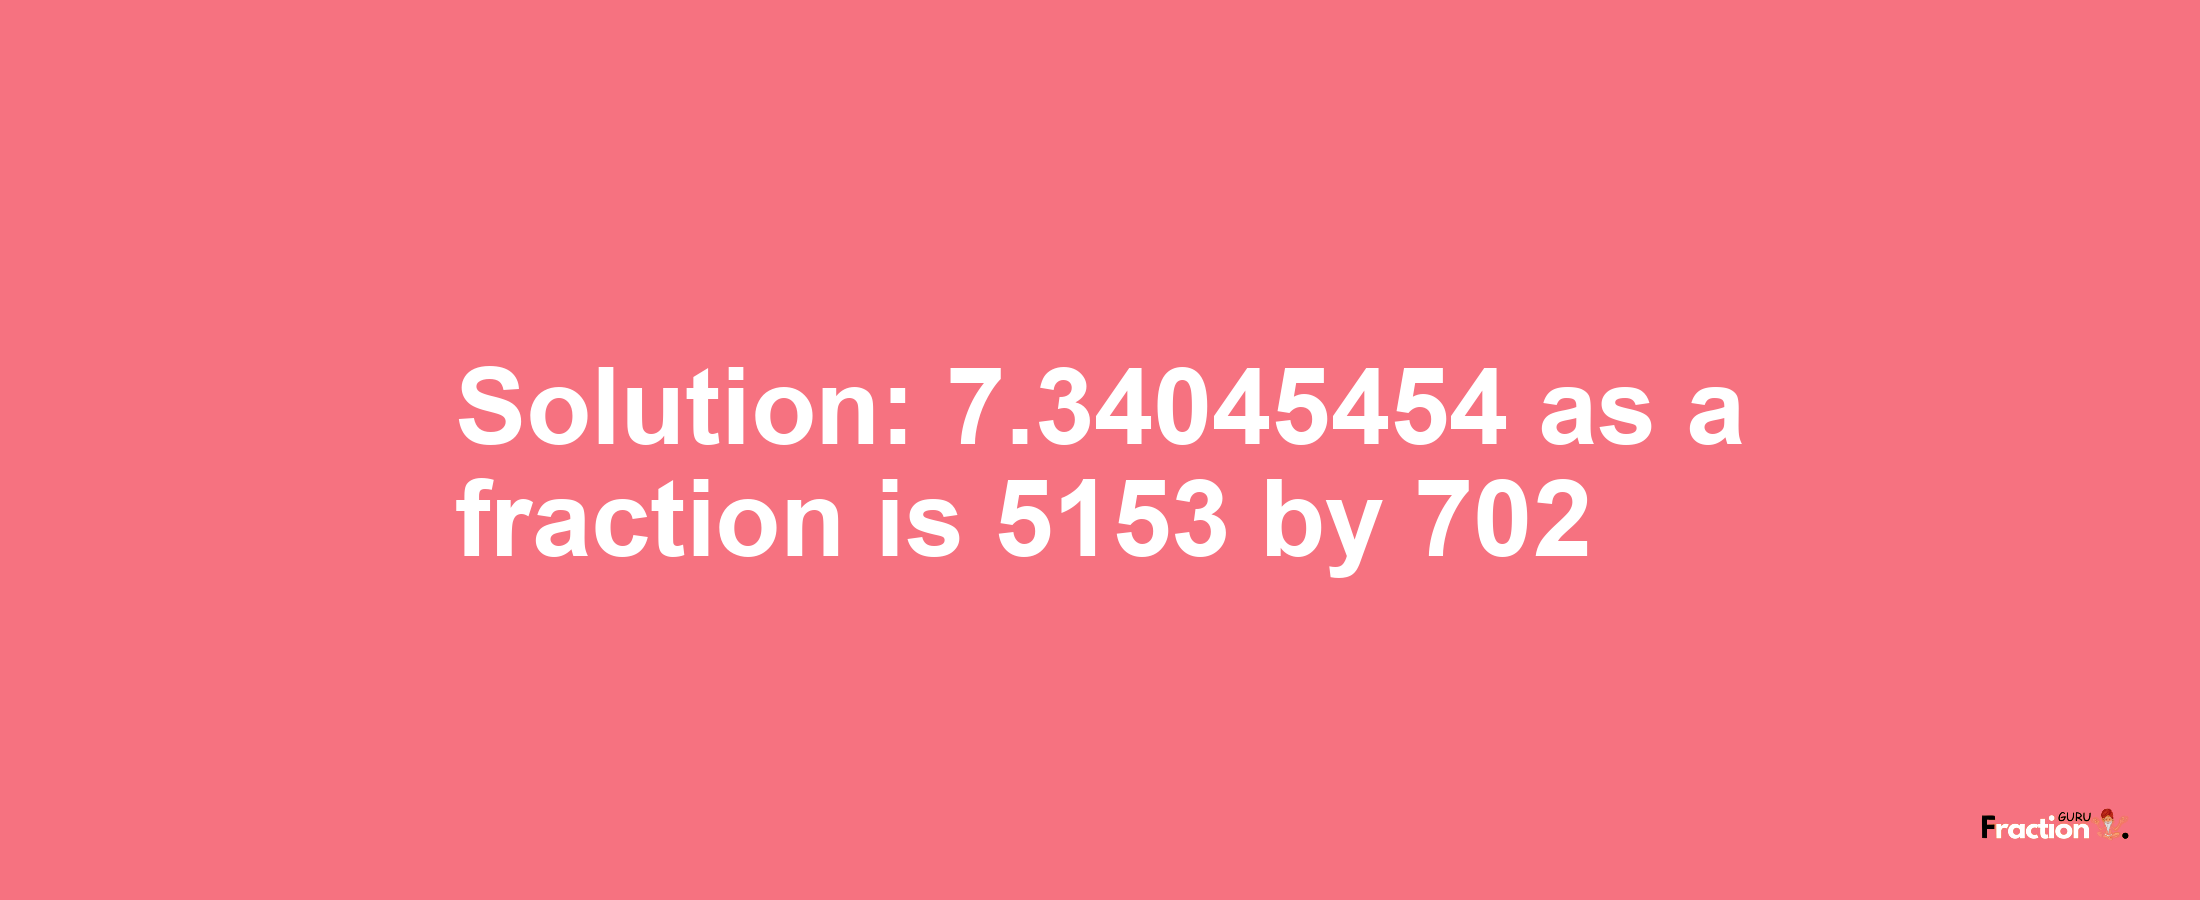 Solution:7.34045454 as a fraction is 5153/702